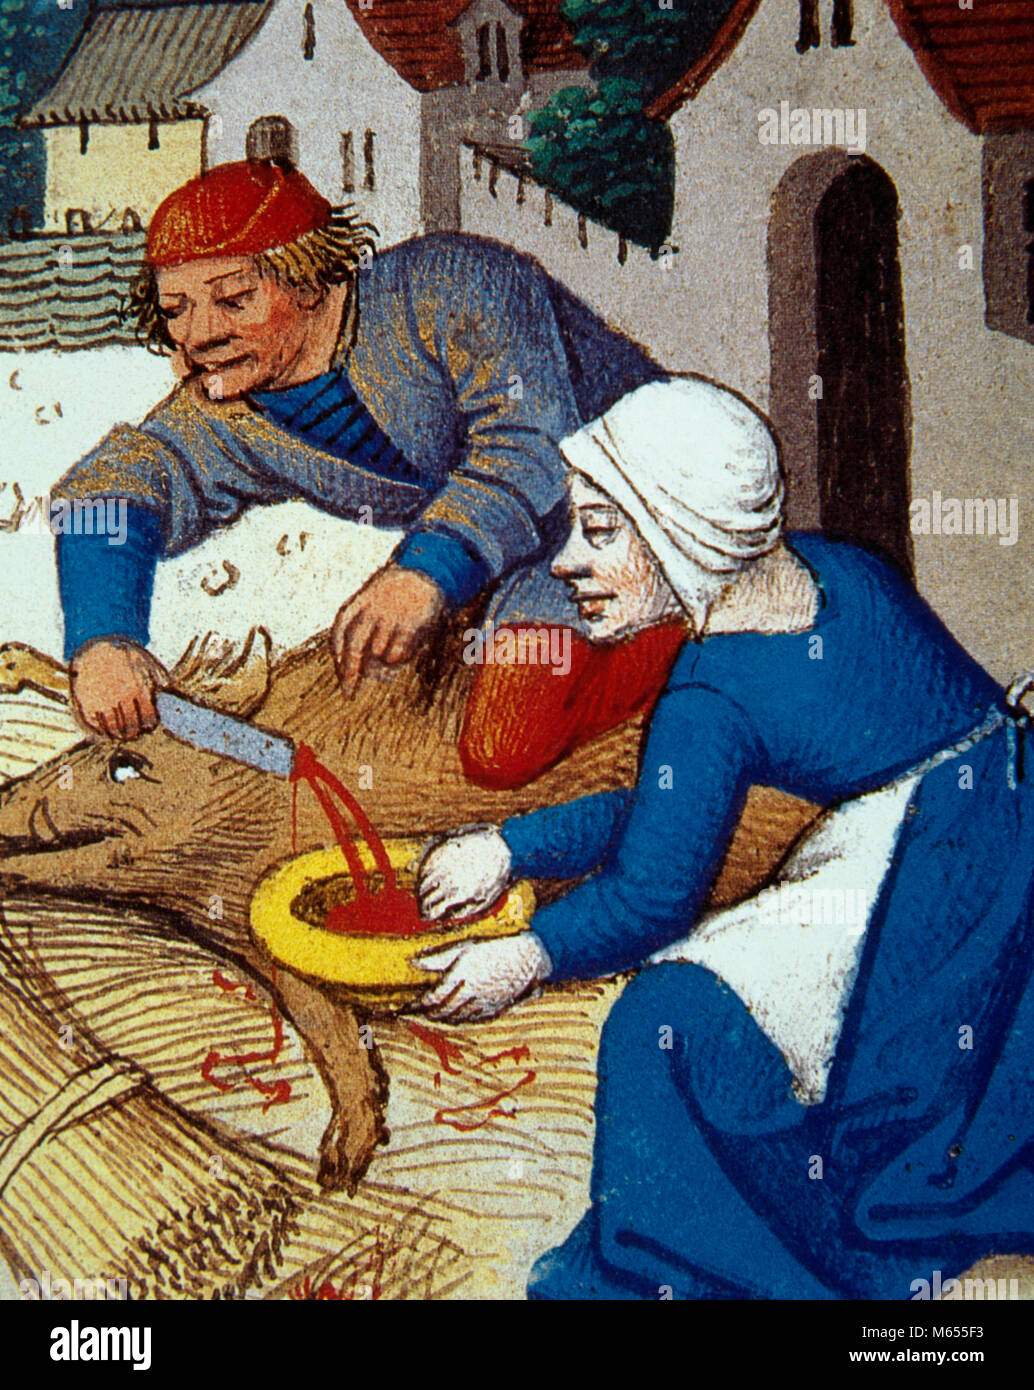 The slaughtering of the pig. Miniature. 'Heures de Seguie', 15th century. Conde Museum. Chateau of Chantilly, France. Stock Photo